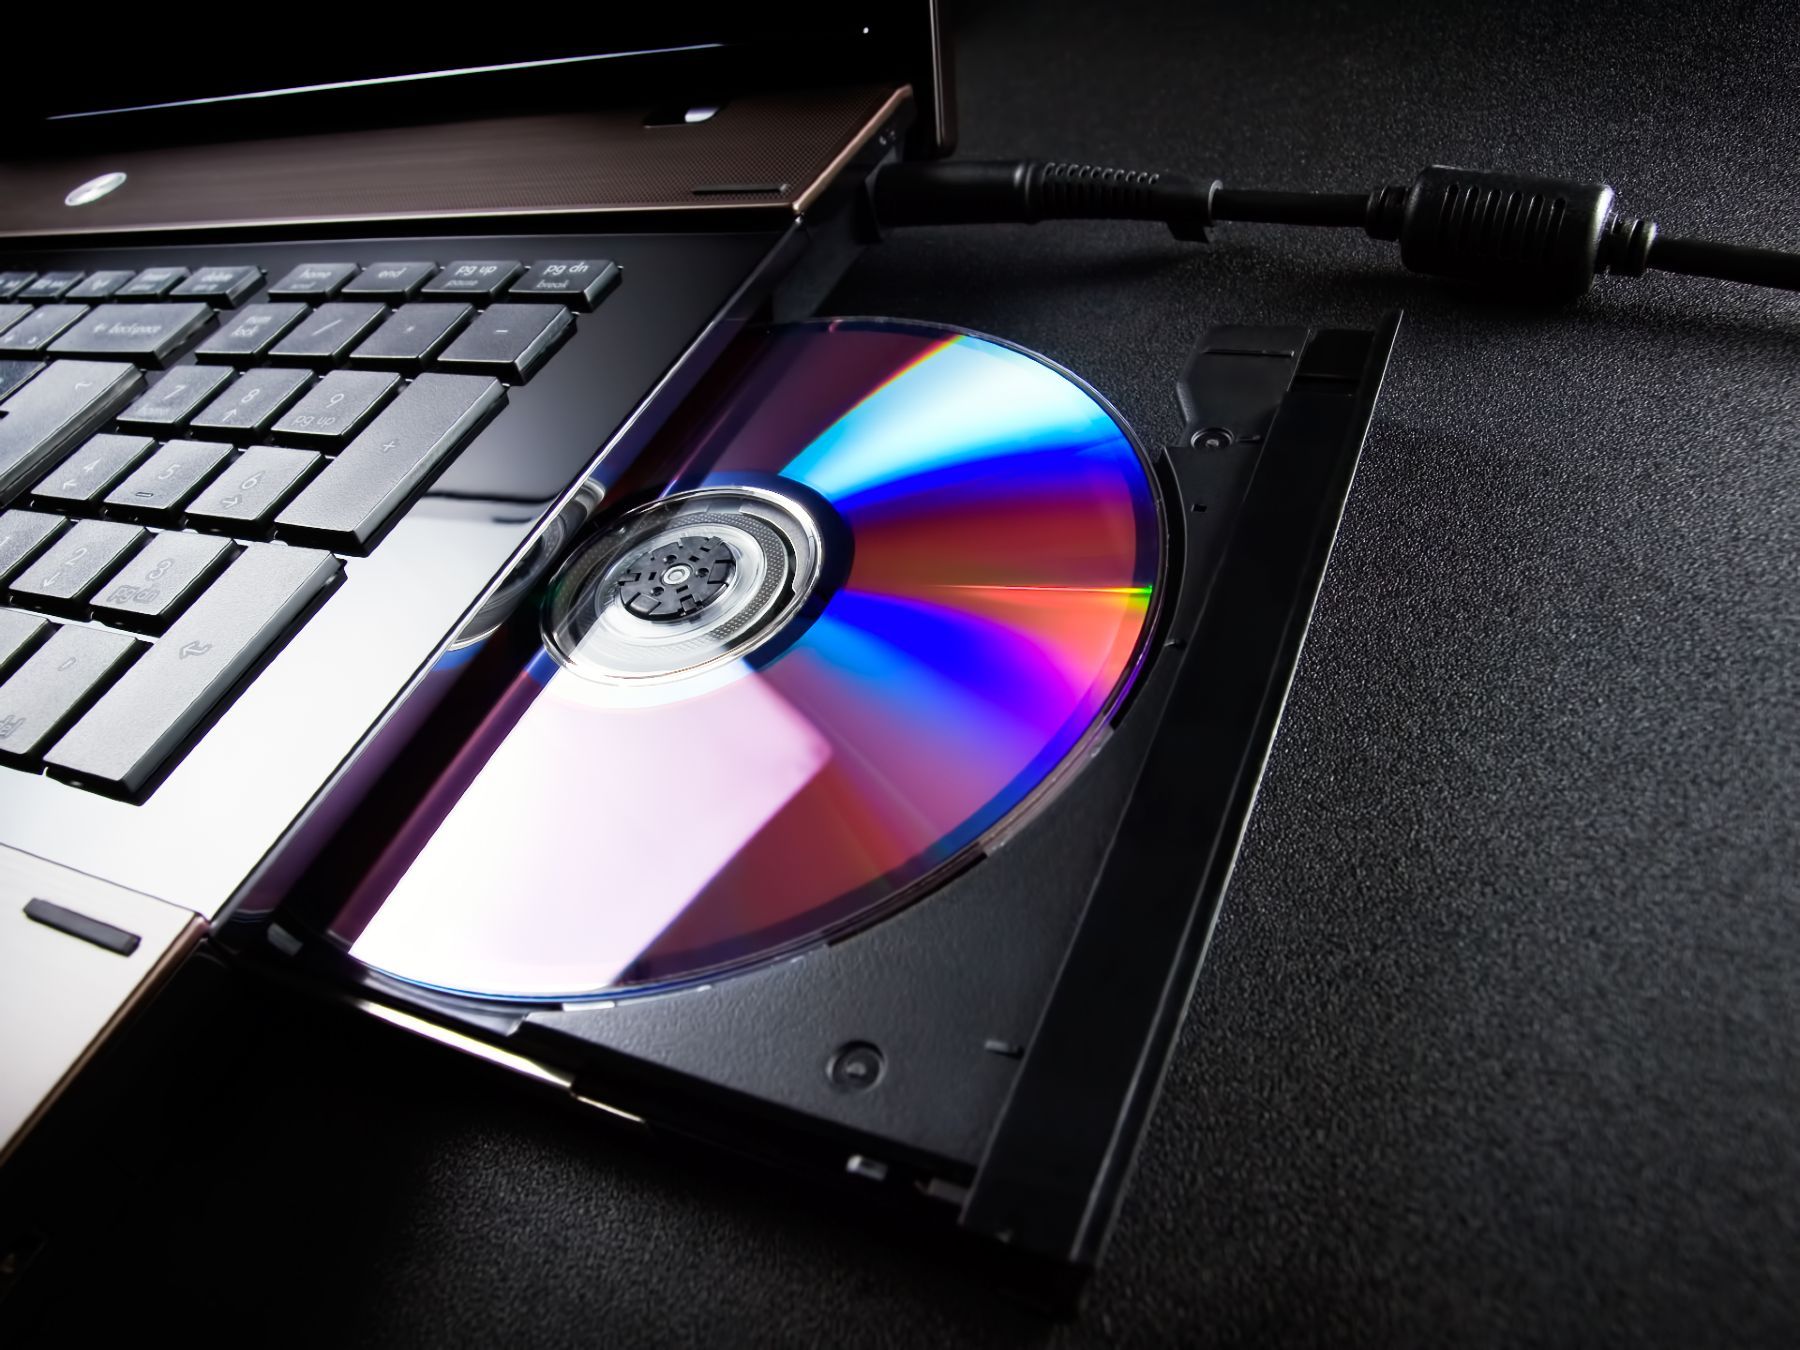 A CD in an optical disc drive on a laptop